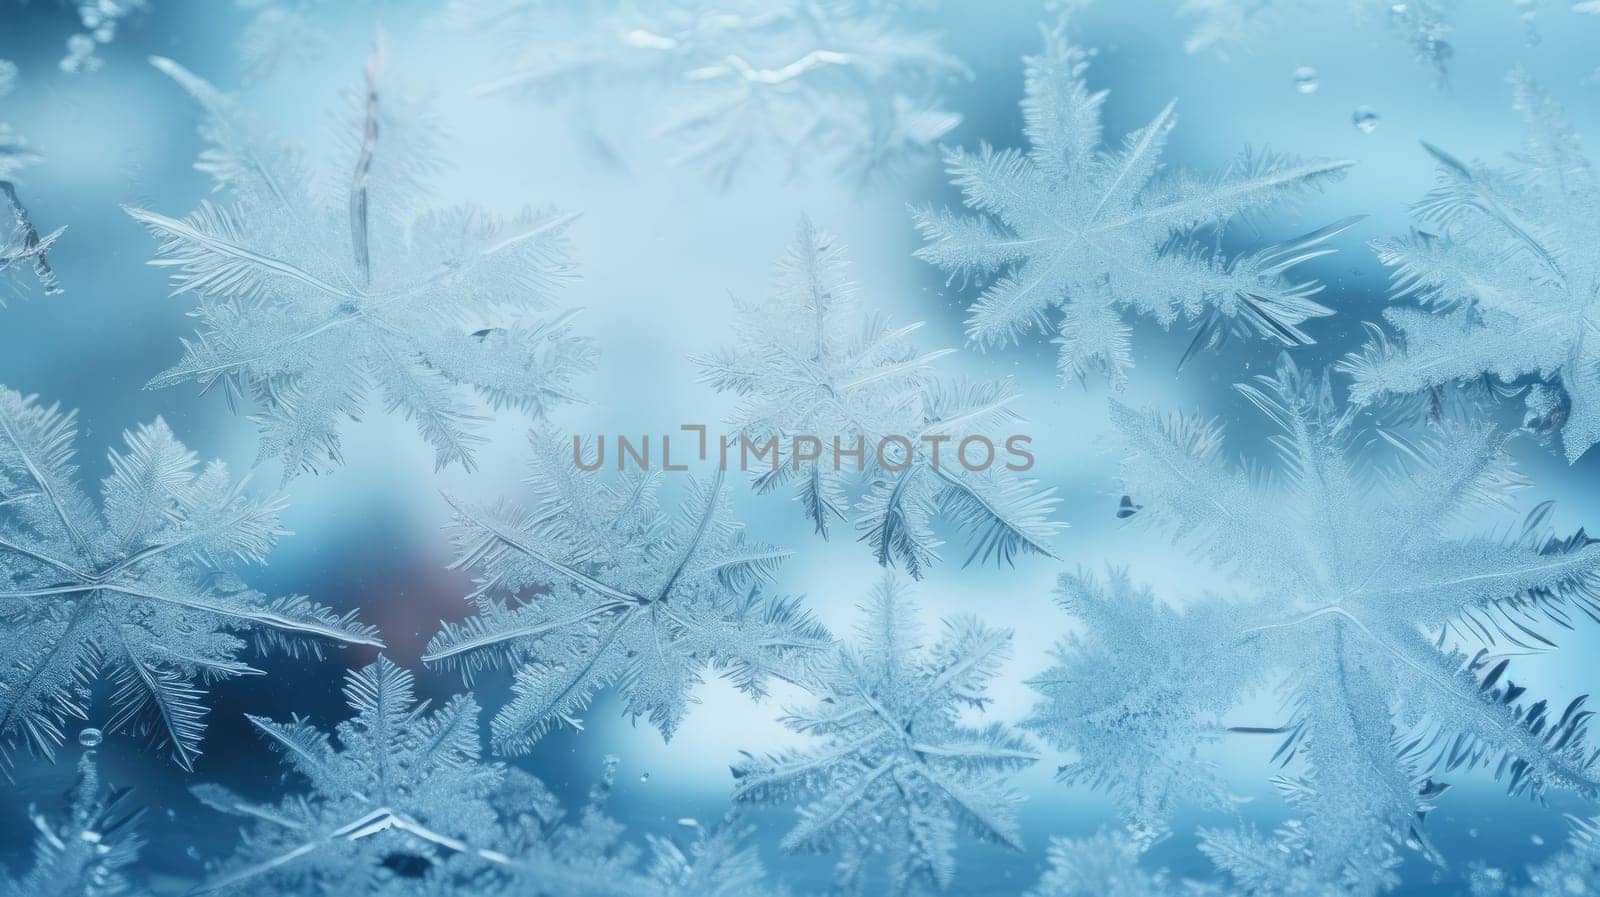 Snow pattern on glass. Winter frost patterns on glass. Ice crystals or cold winter background. AI